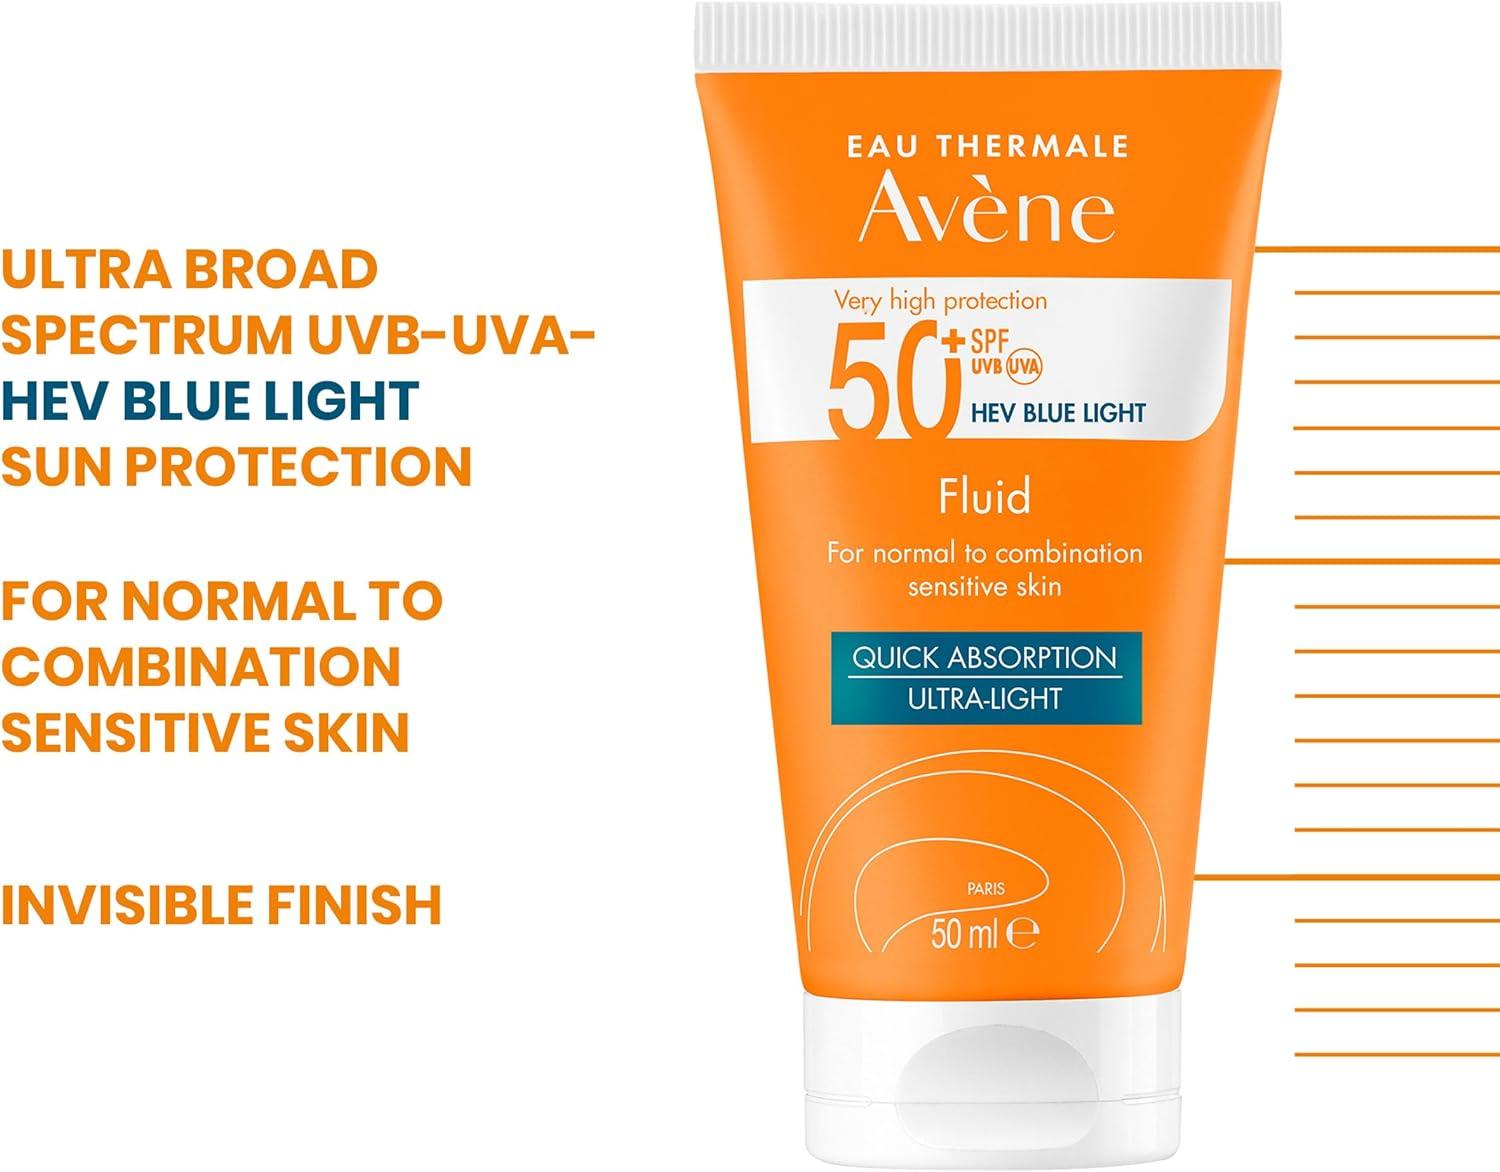 Thermale Avène Very High Protection Fluid SPF 50+ - Wellness Shoppee